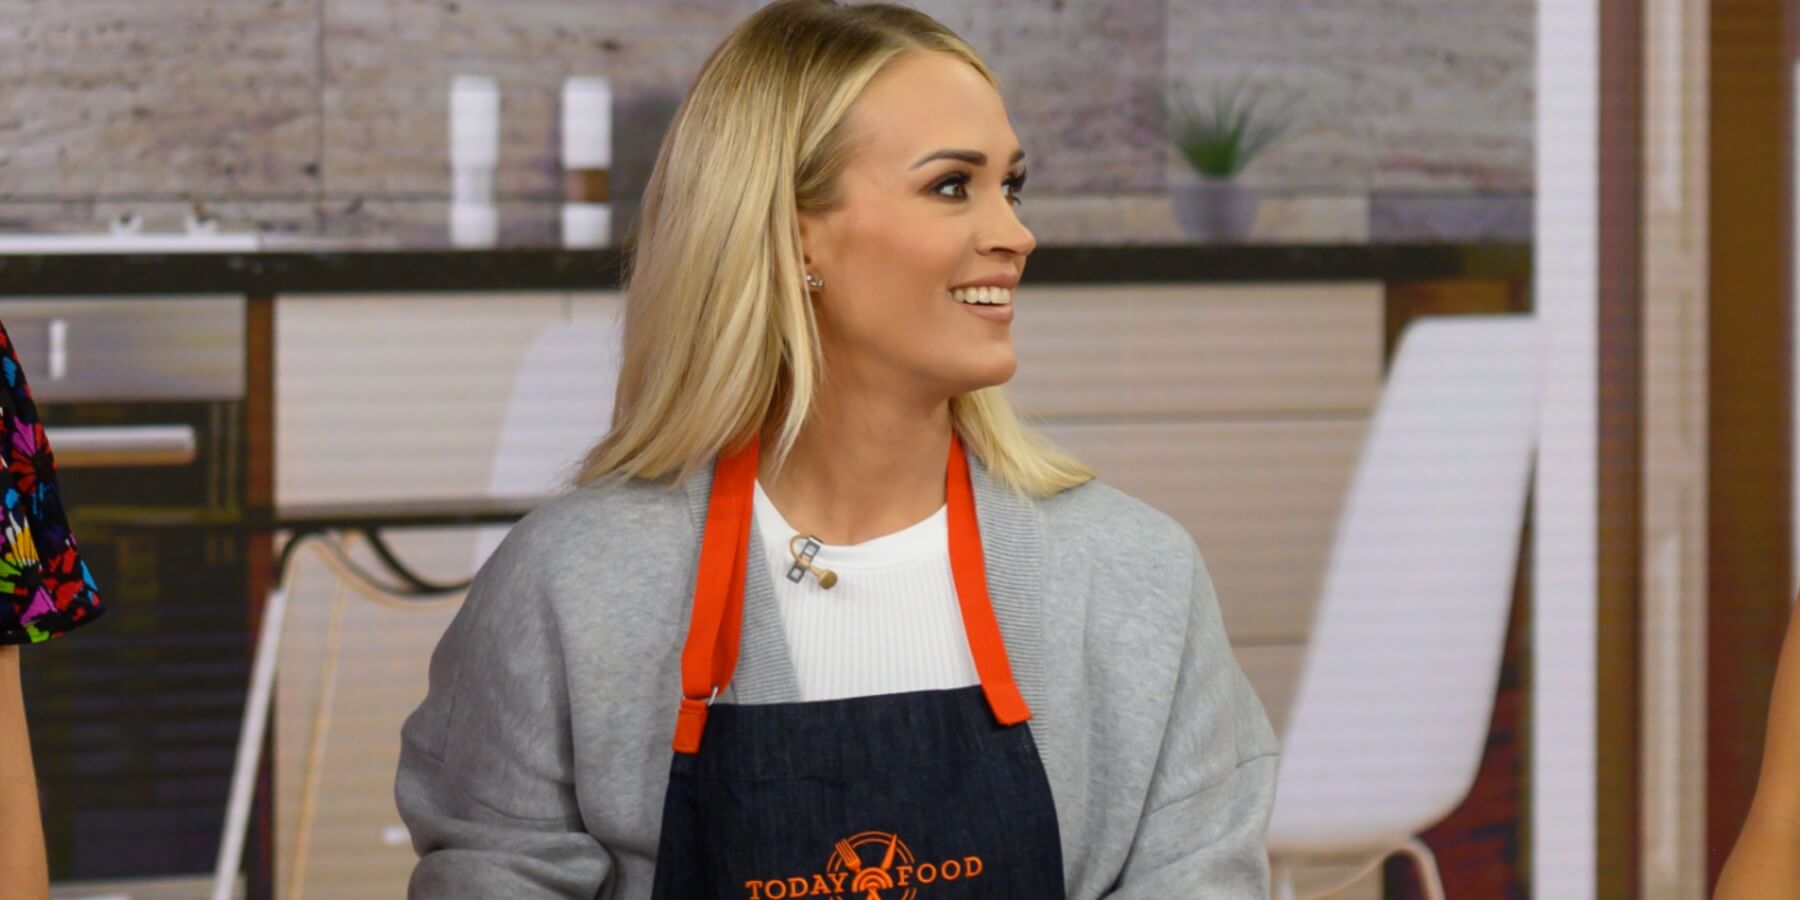 Carrie Underwood shows off her cooking skills during a TODAY show segment in 2020.